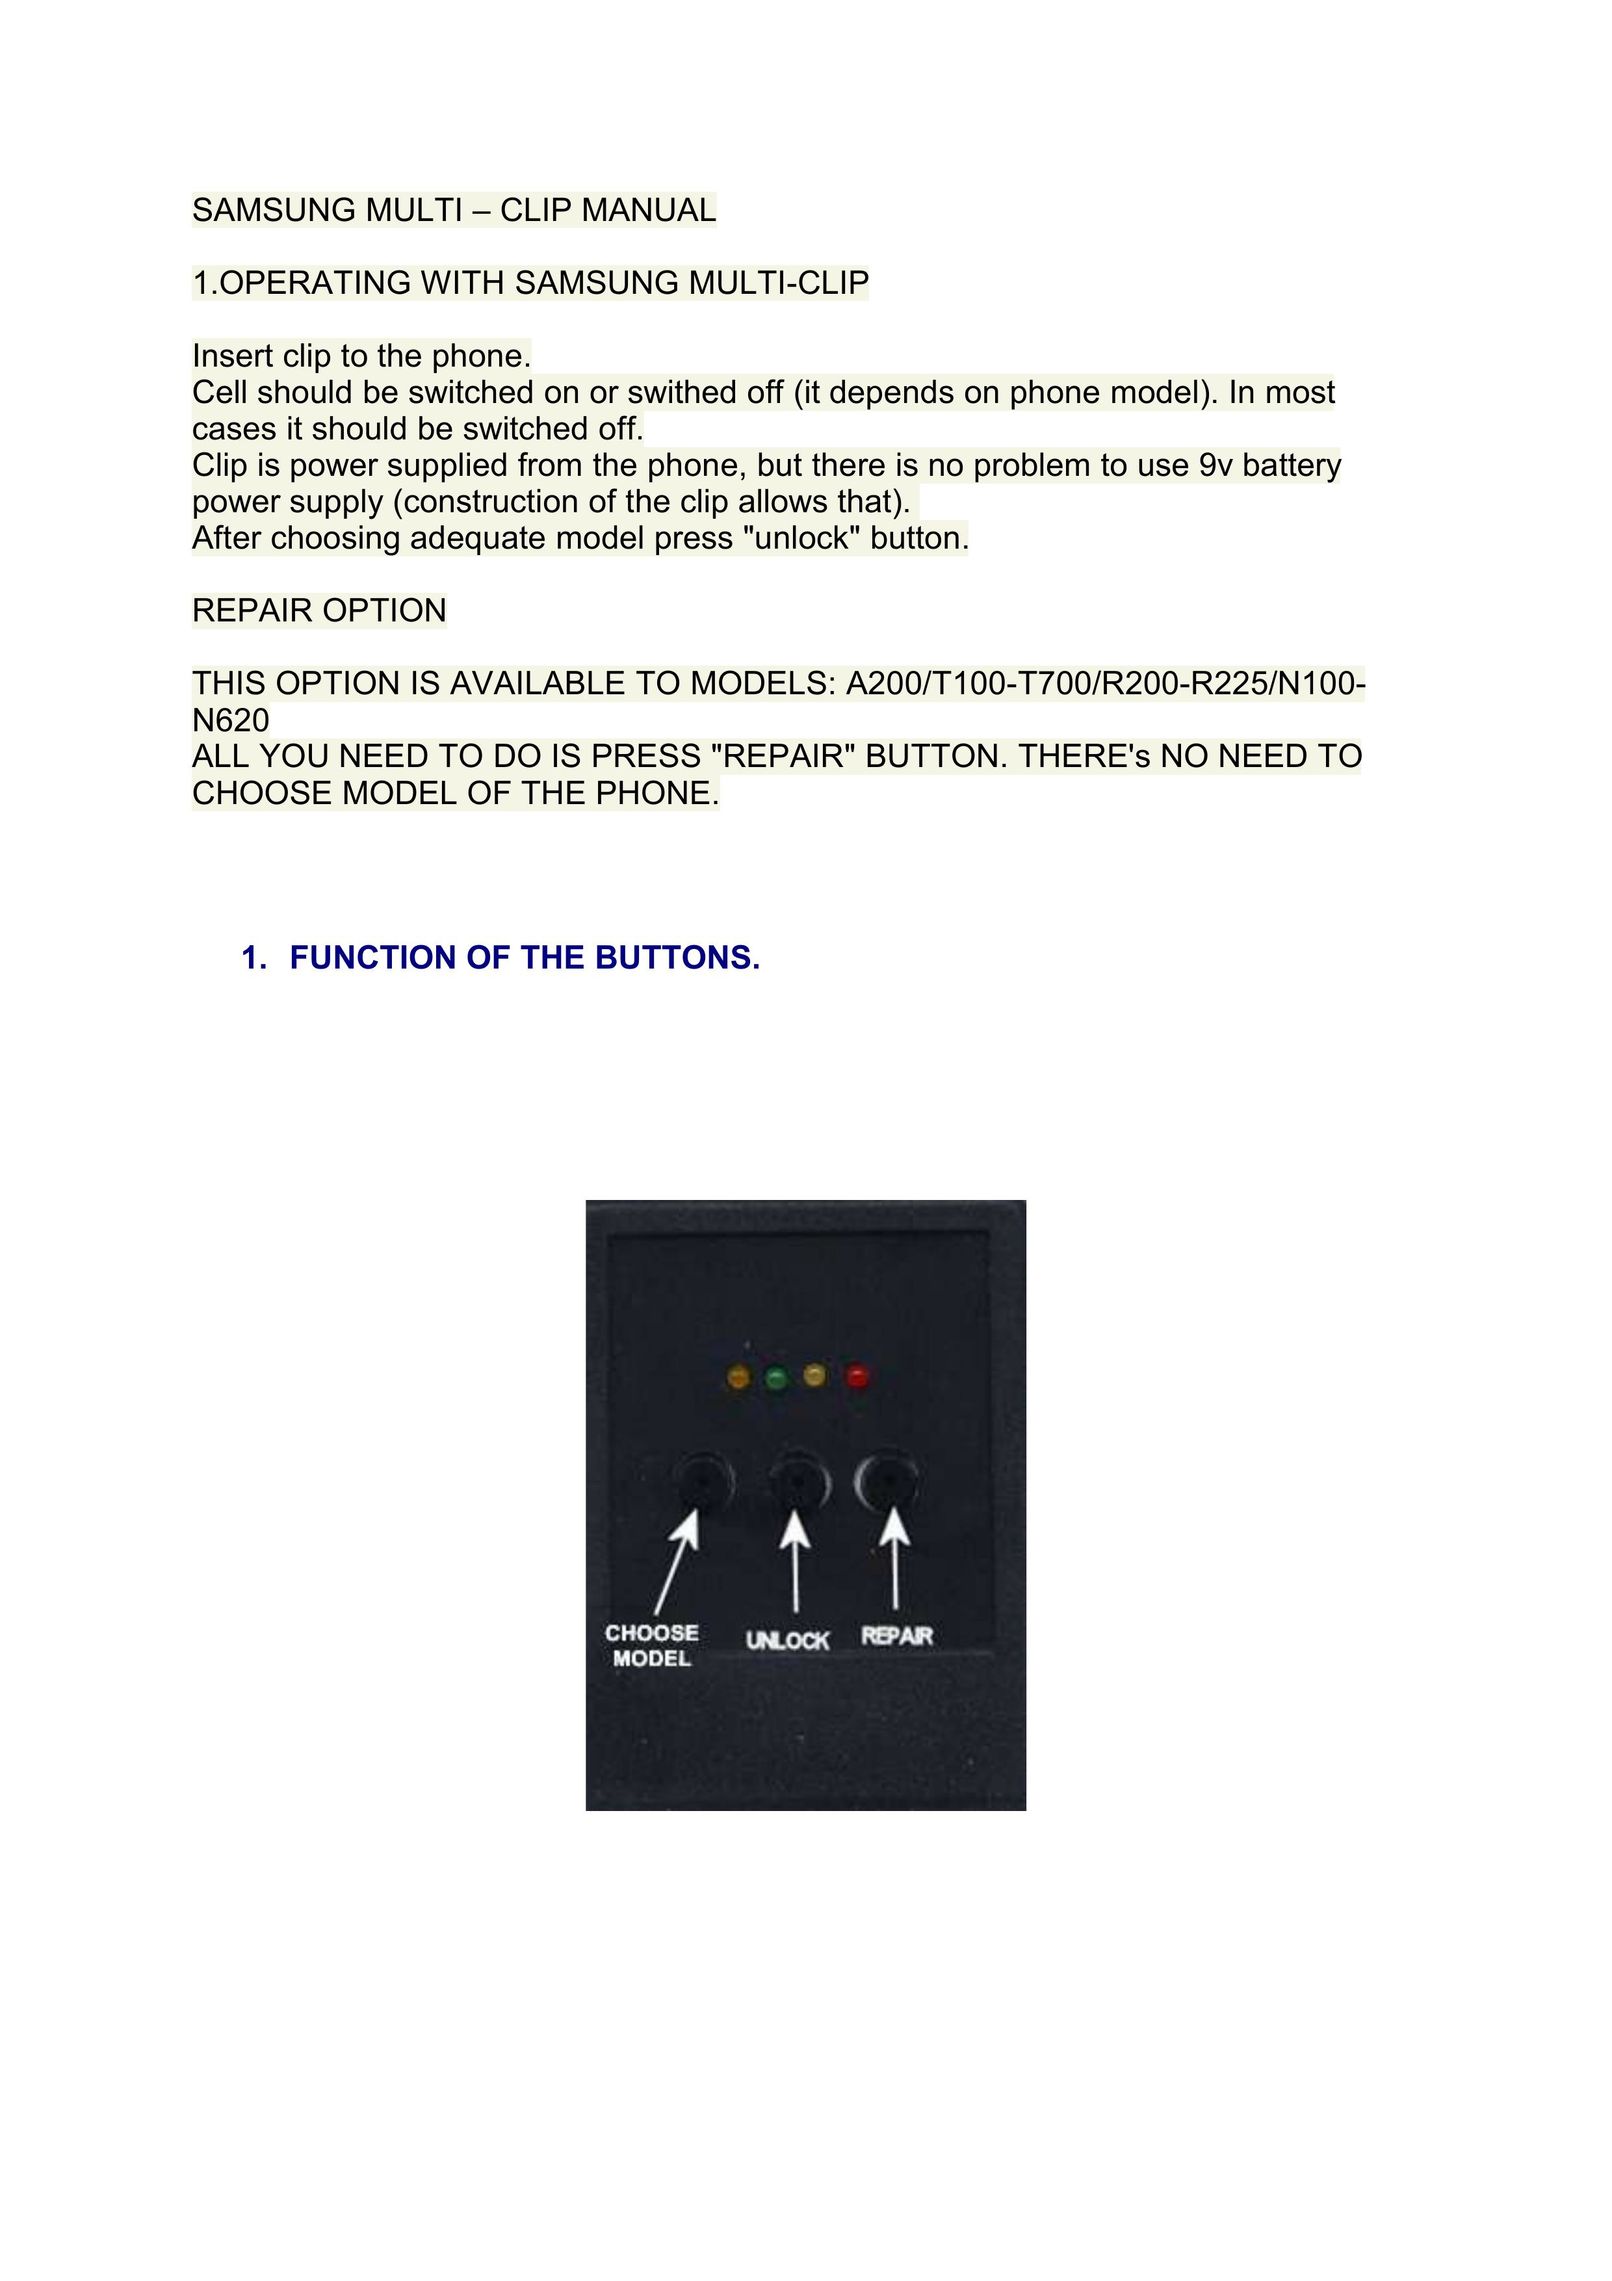 Samsung A200 Cell Phone Accessories User Manual